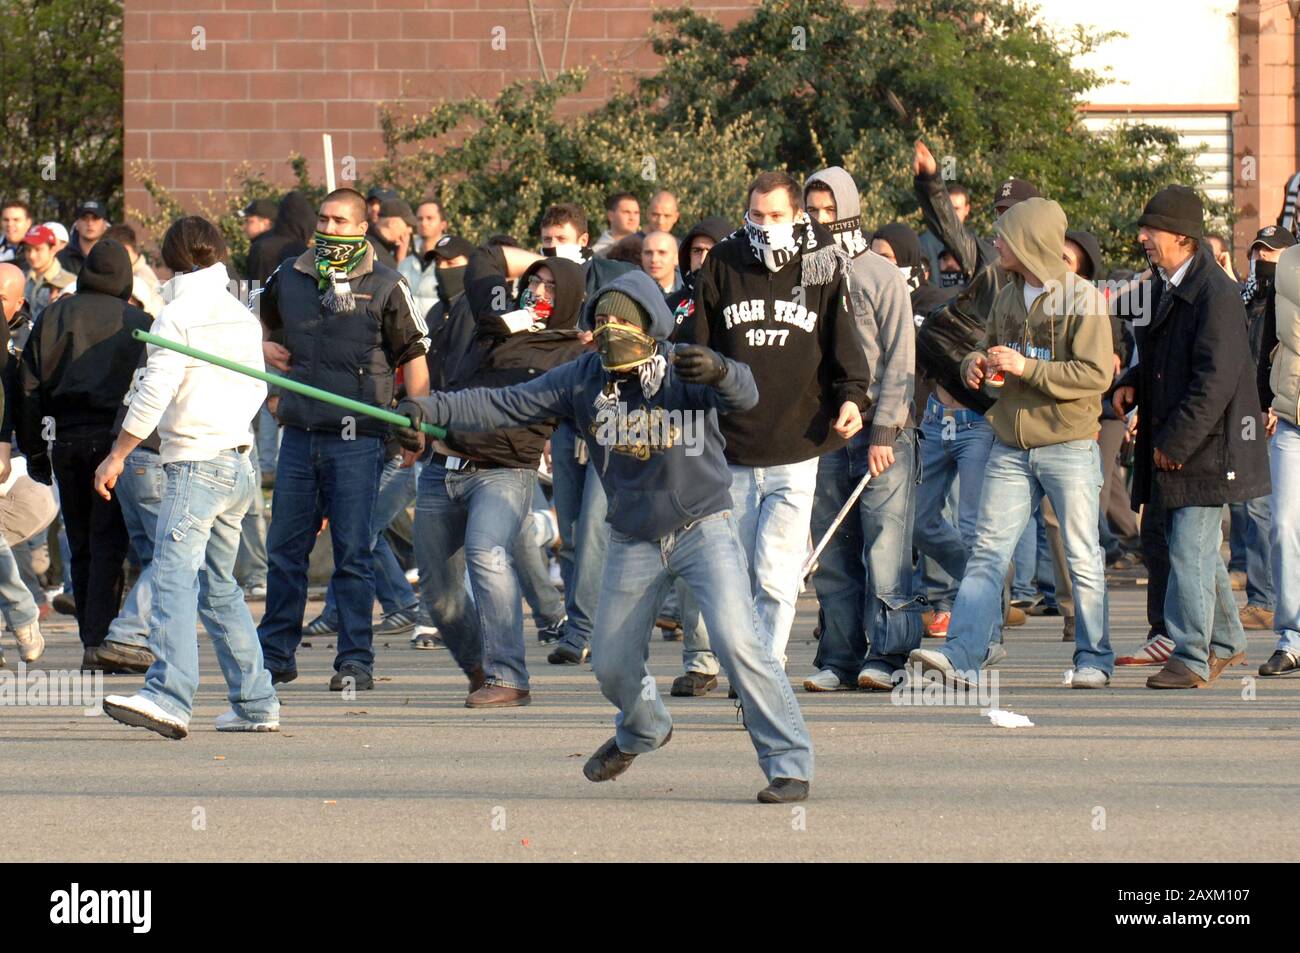 Juventus Football fans clash with Liverpool fans and police when the two  teams met in Turin in 2005. It was the first clash since the Heysel stadium  disaster in 1985 when 39